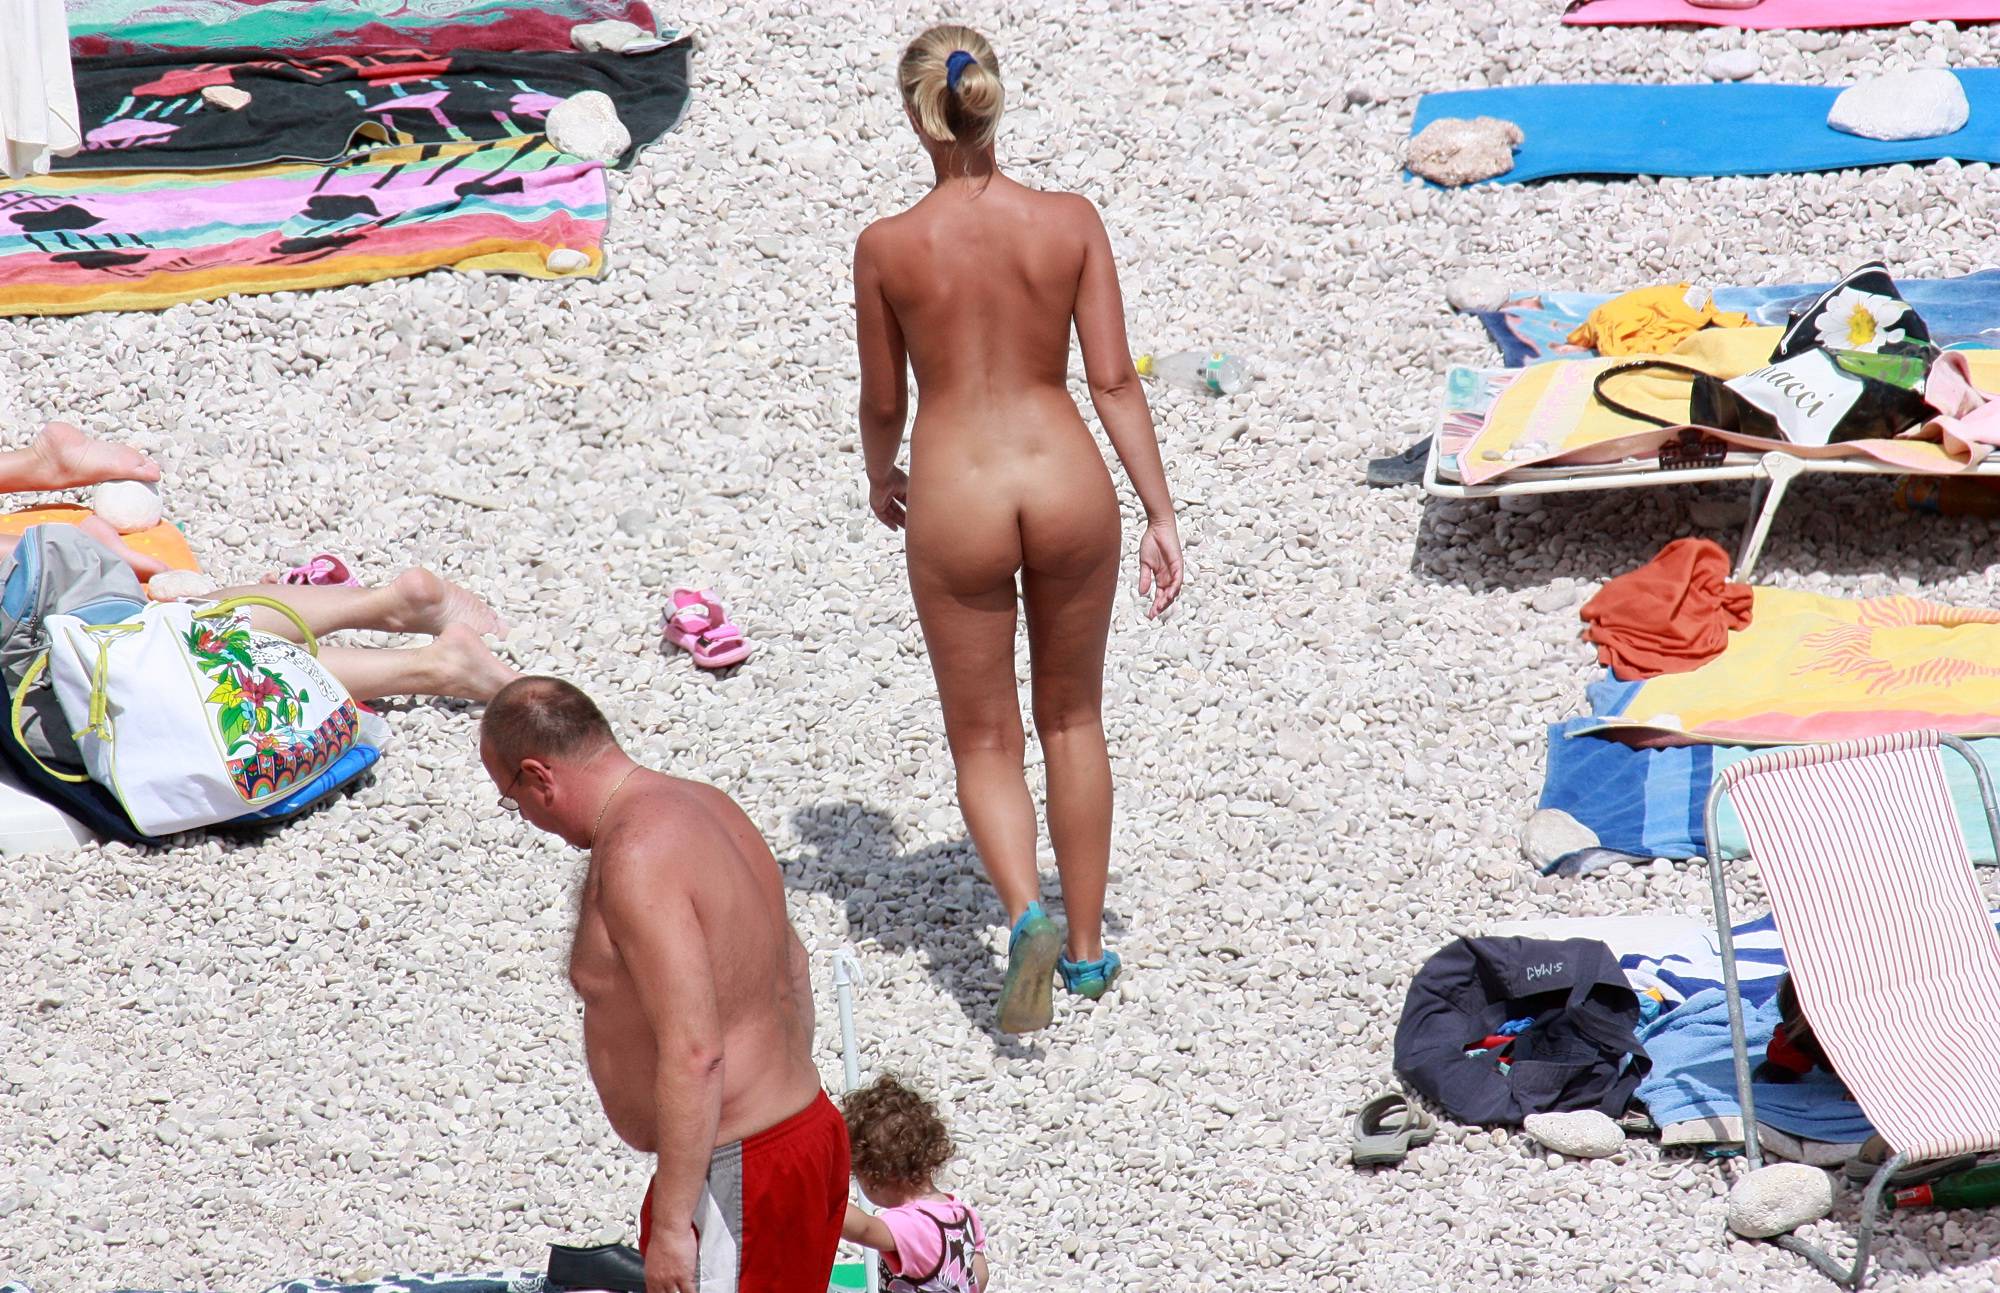 Pure Nudism Images Stroll Along The Hot Sands - 3